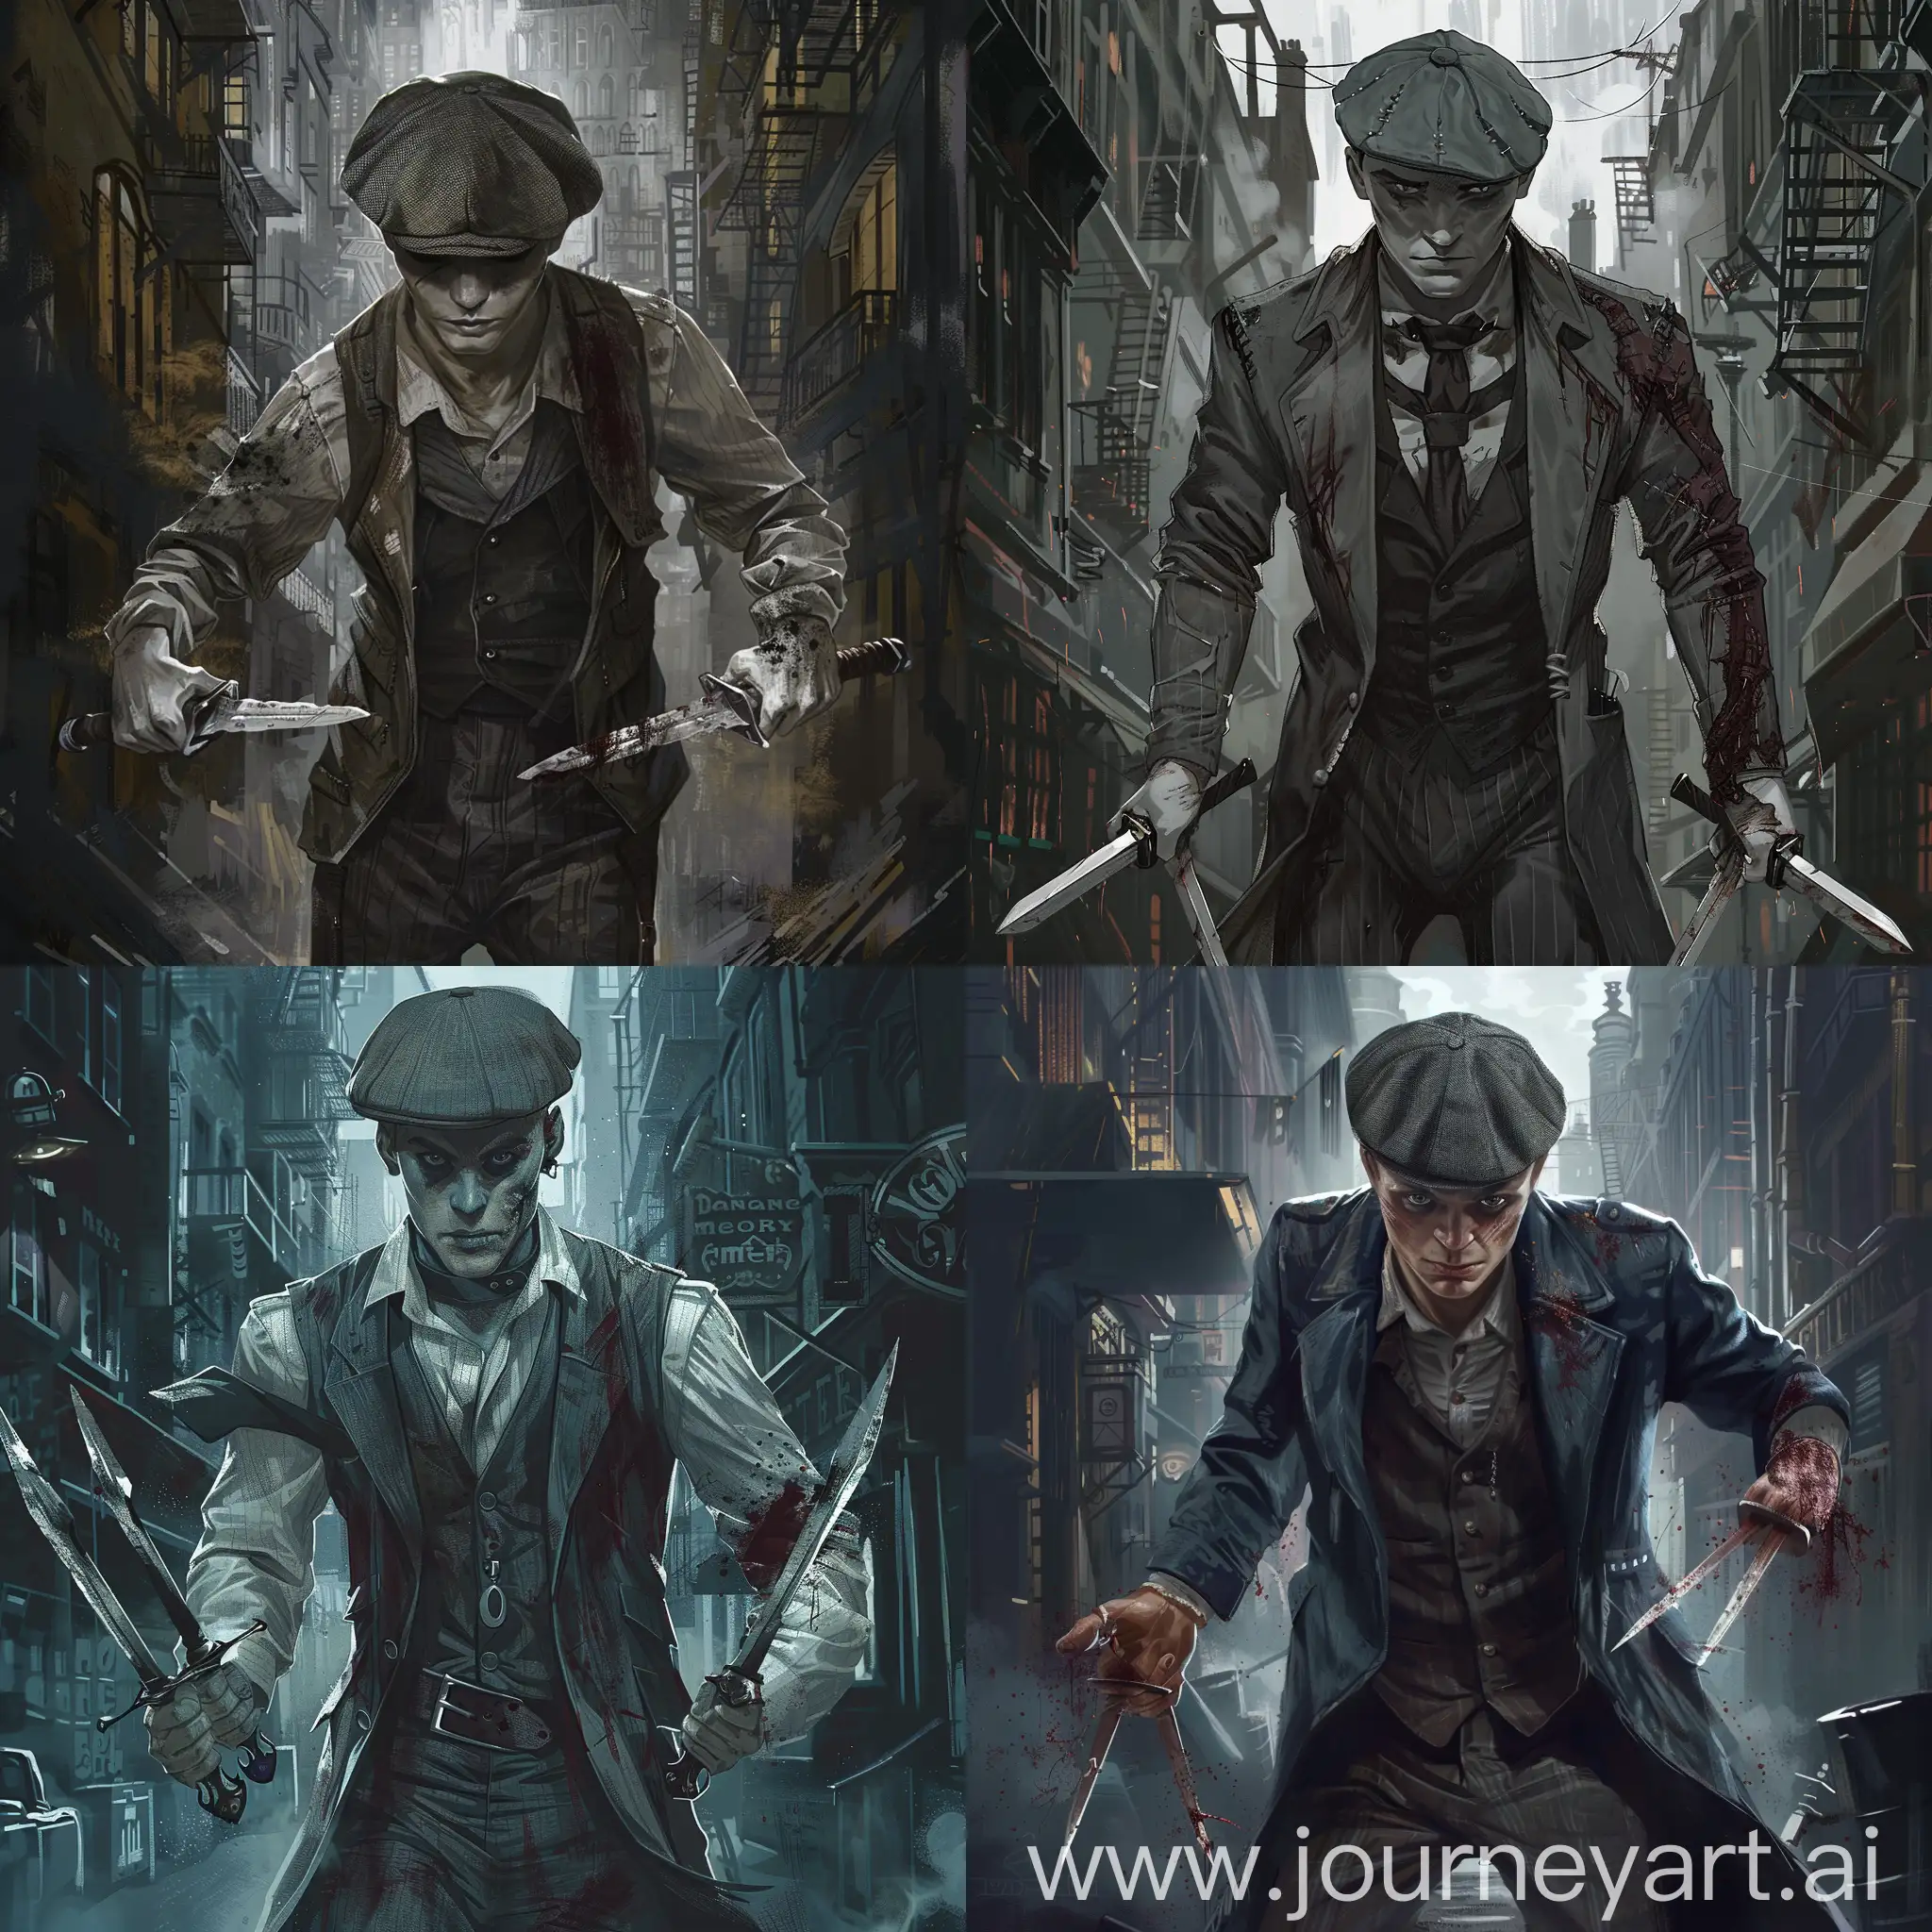 Draw a character from the Dungeons and Dragons universe according to the following description: He is a 20 years old male changeling dressed in clothing in the style of peaky blinders. He is holding a dagger in each hand. He is wearing a flat cap. His eyes are dark.  He has a scar on his face. His skin is light grey, almost white like ash. He is standing in the middle of an industrial city hiding in the shadows. Use a steampunk style art